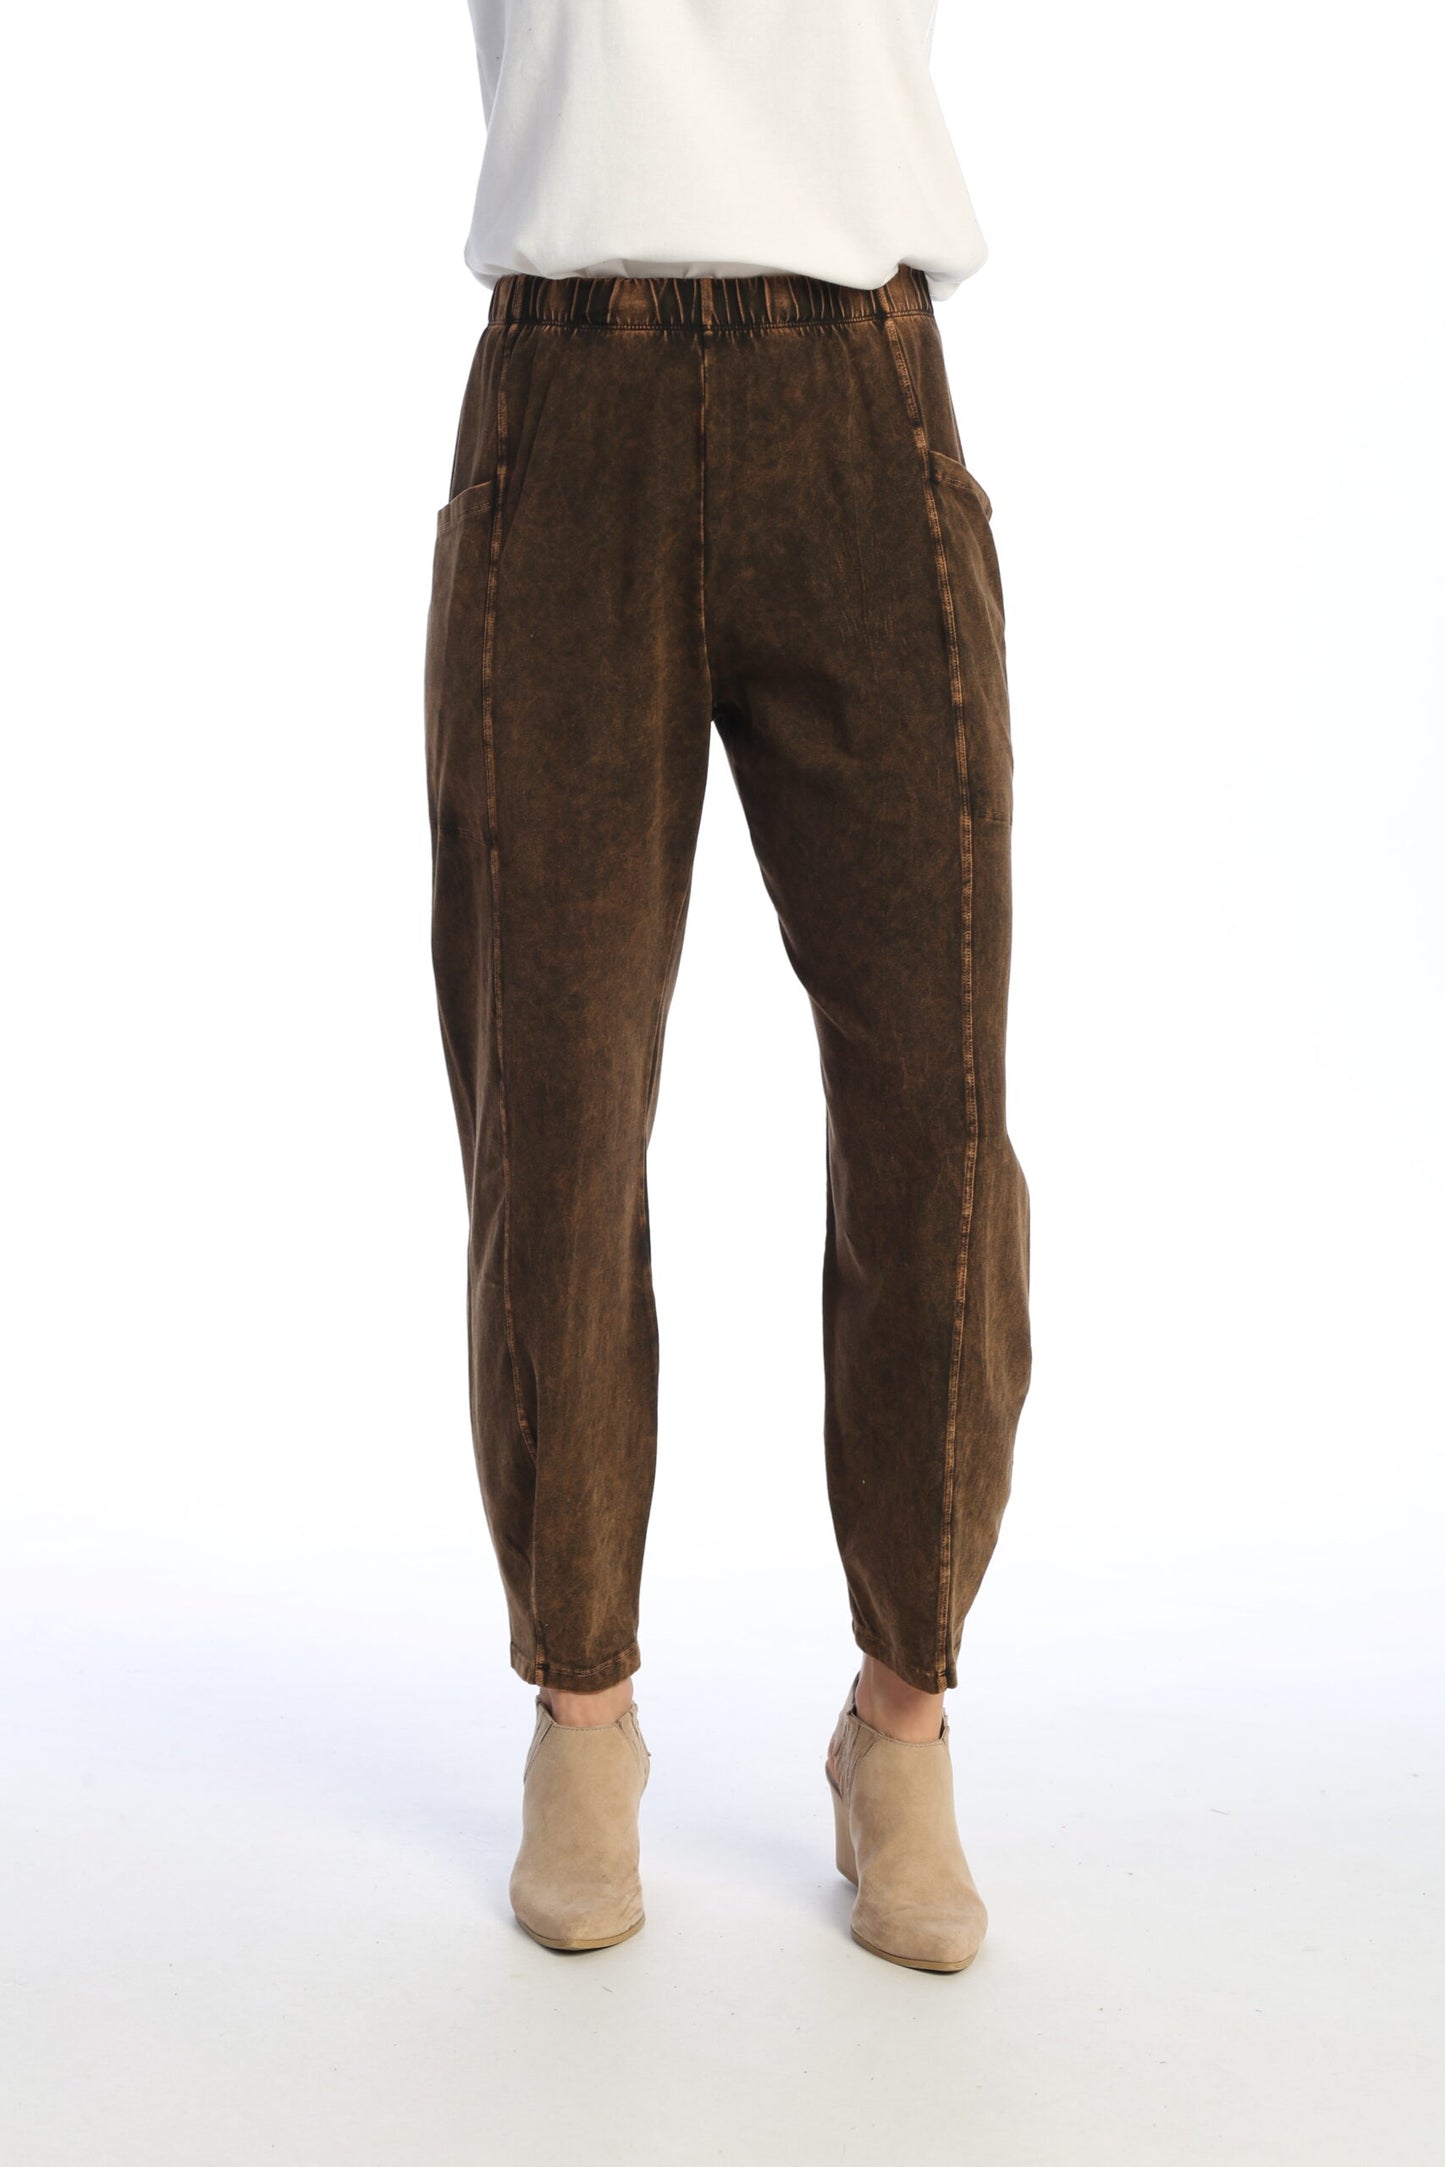 Chocolate Mineral Washed Cotton Lantern Pants With Side Patch Pockets